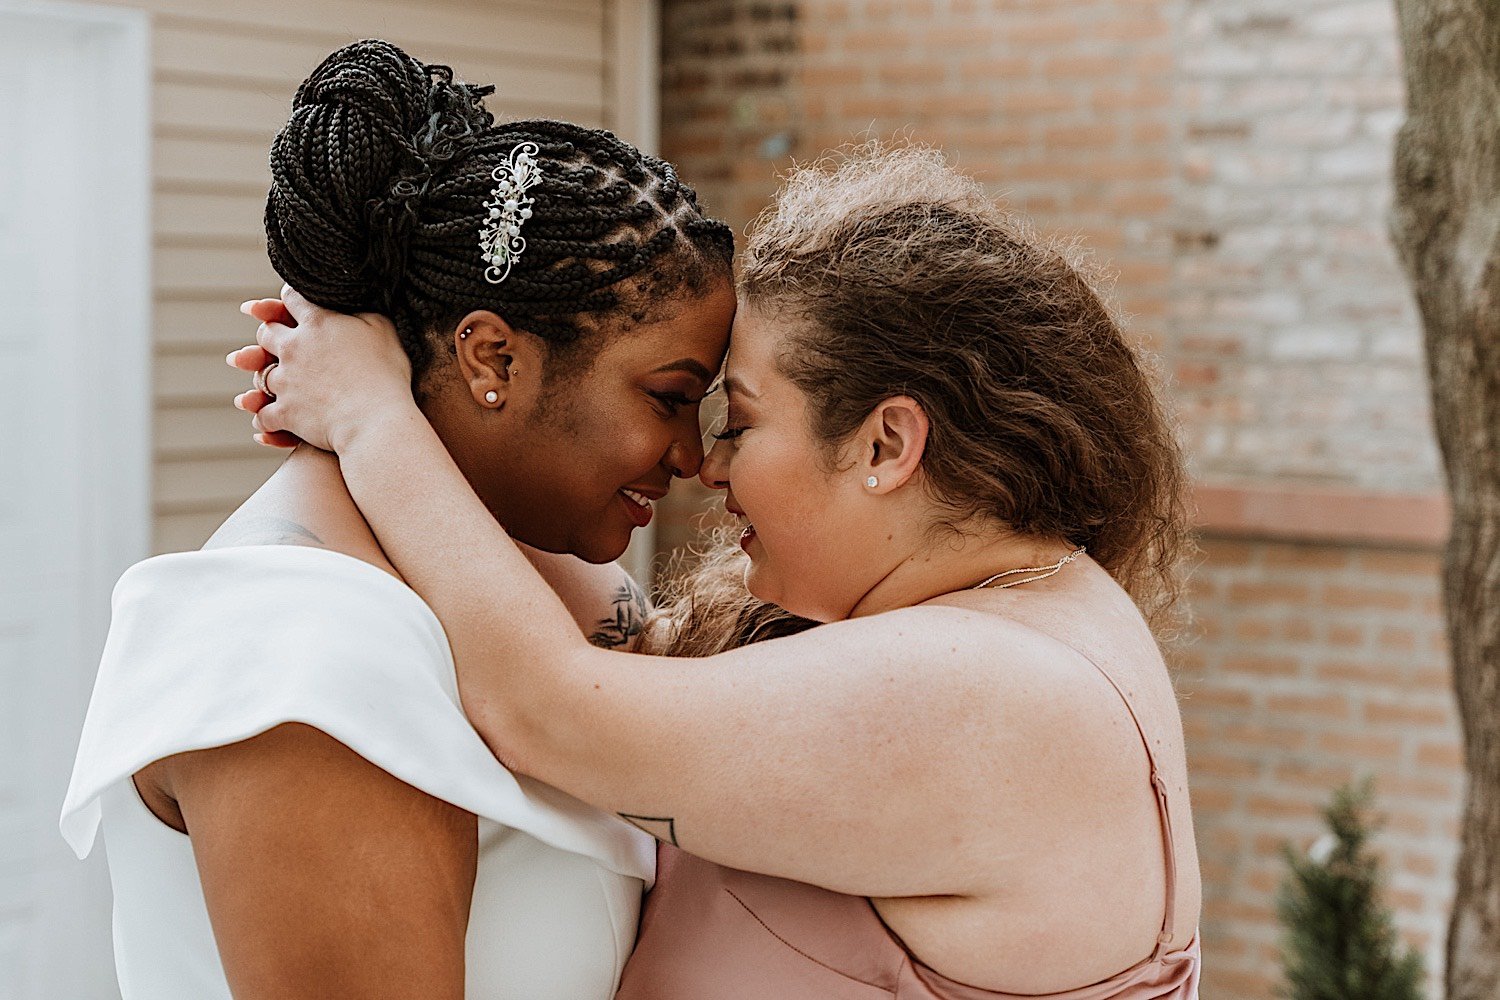 Newlywed brides laugh and embrace each other in Humboldt Park Chicago after their wedding